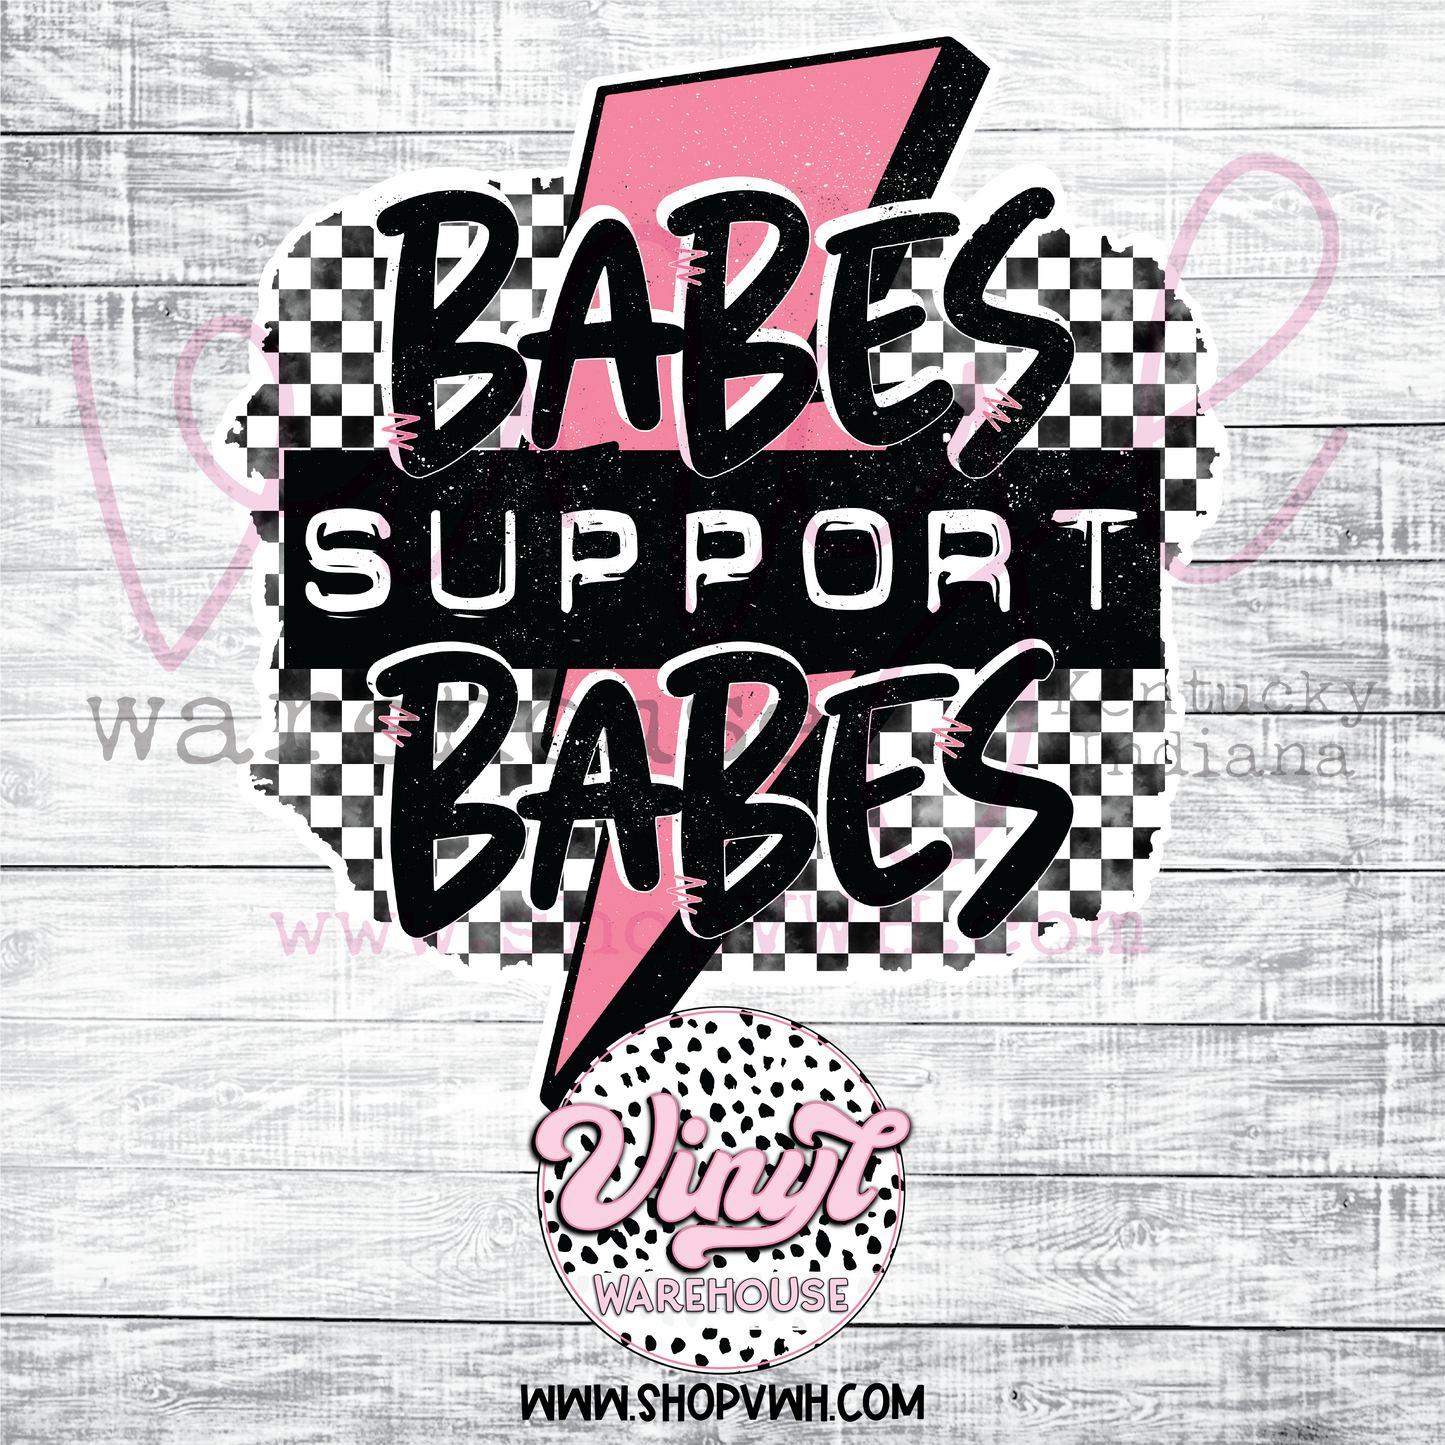 Printed Adhesive Decal - Babes Support Babes (Retro Bolt)